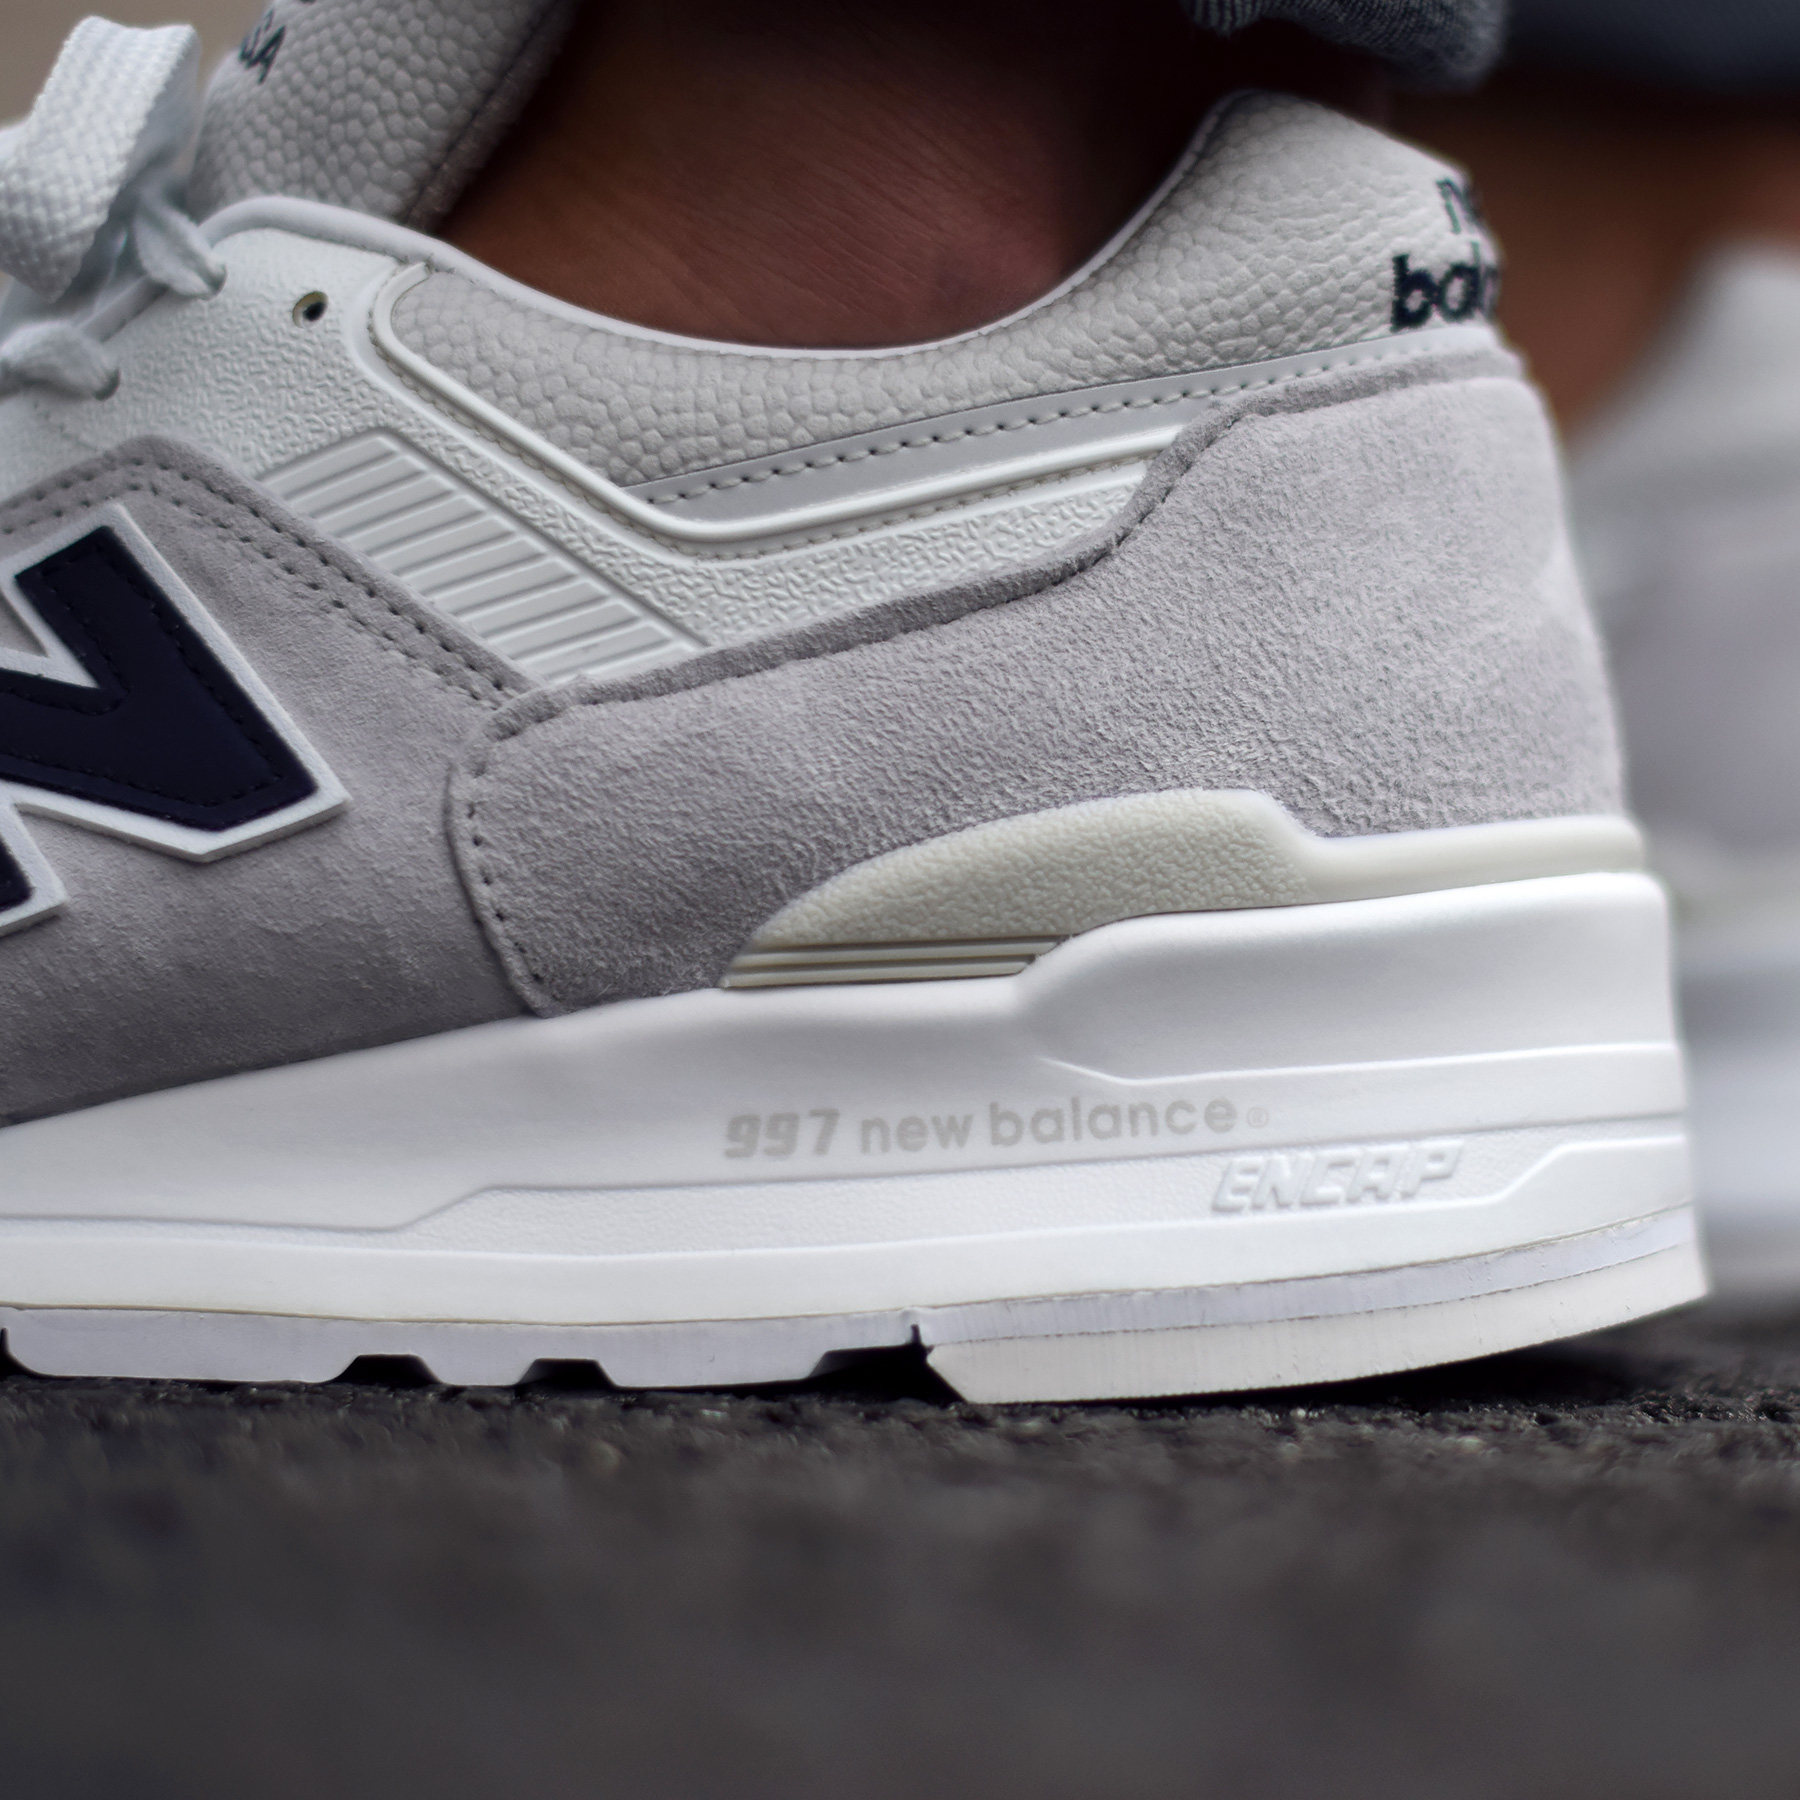 New Balance 997 JOL Made in USA - Sneakers.fr